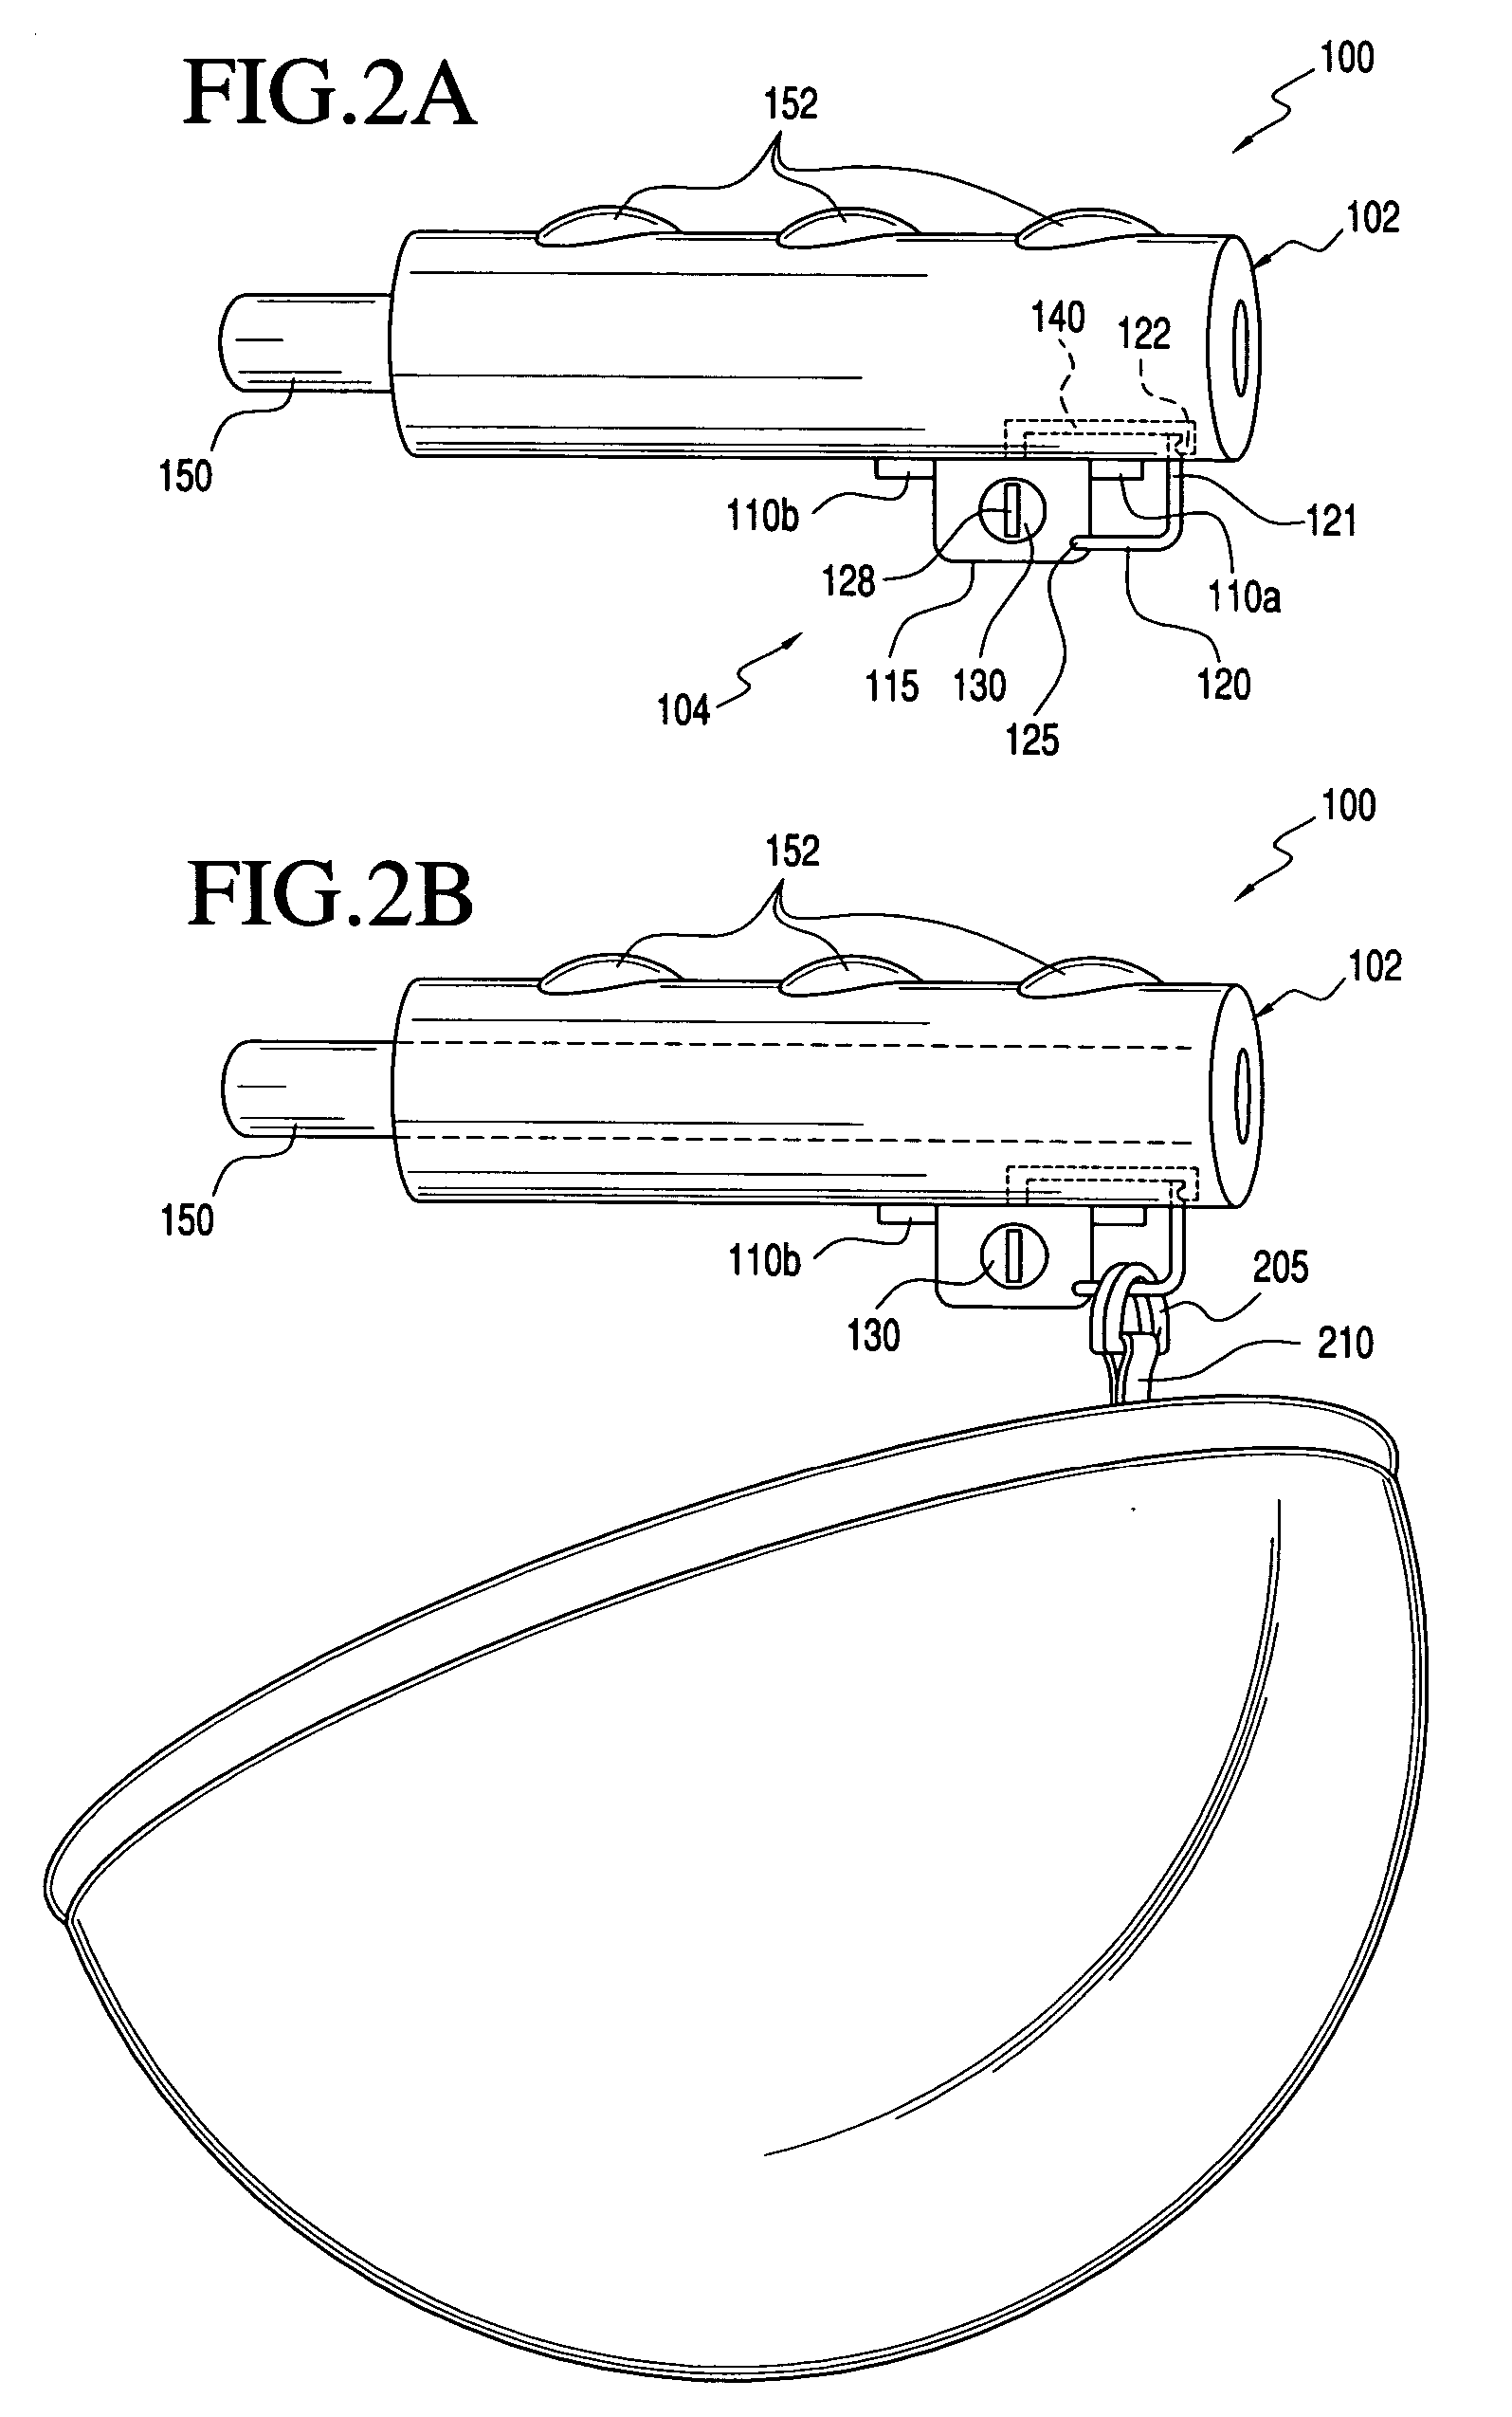 Apparatus for locking a device to a cycle footrest